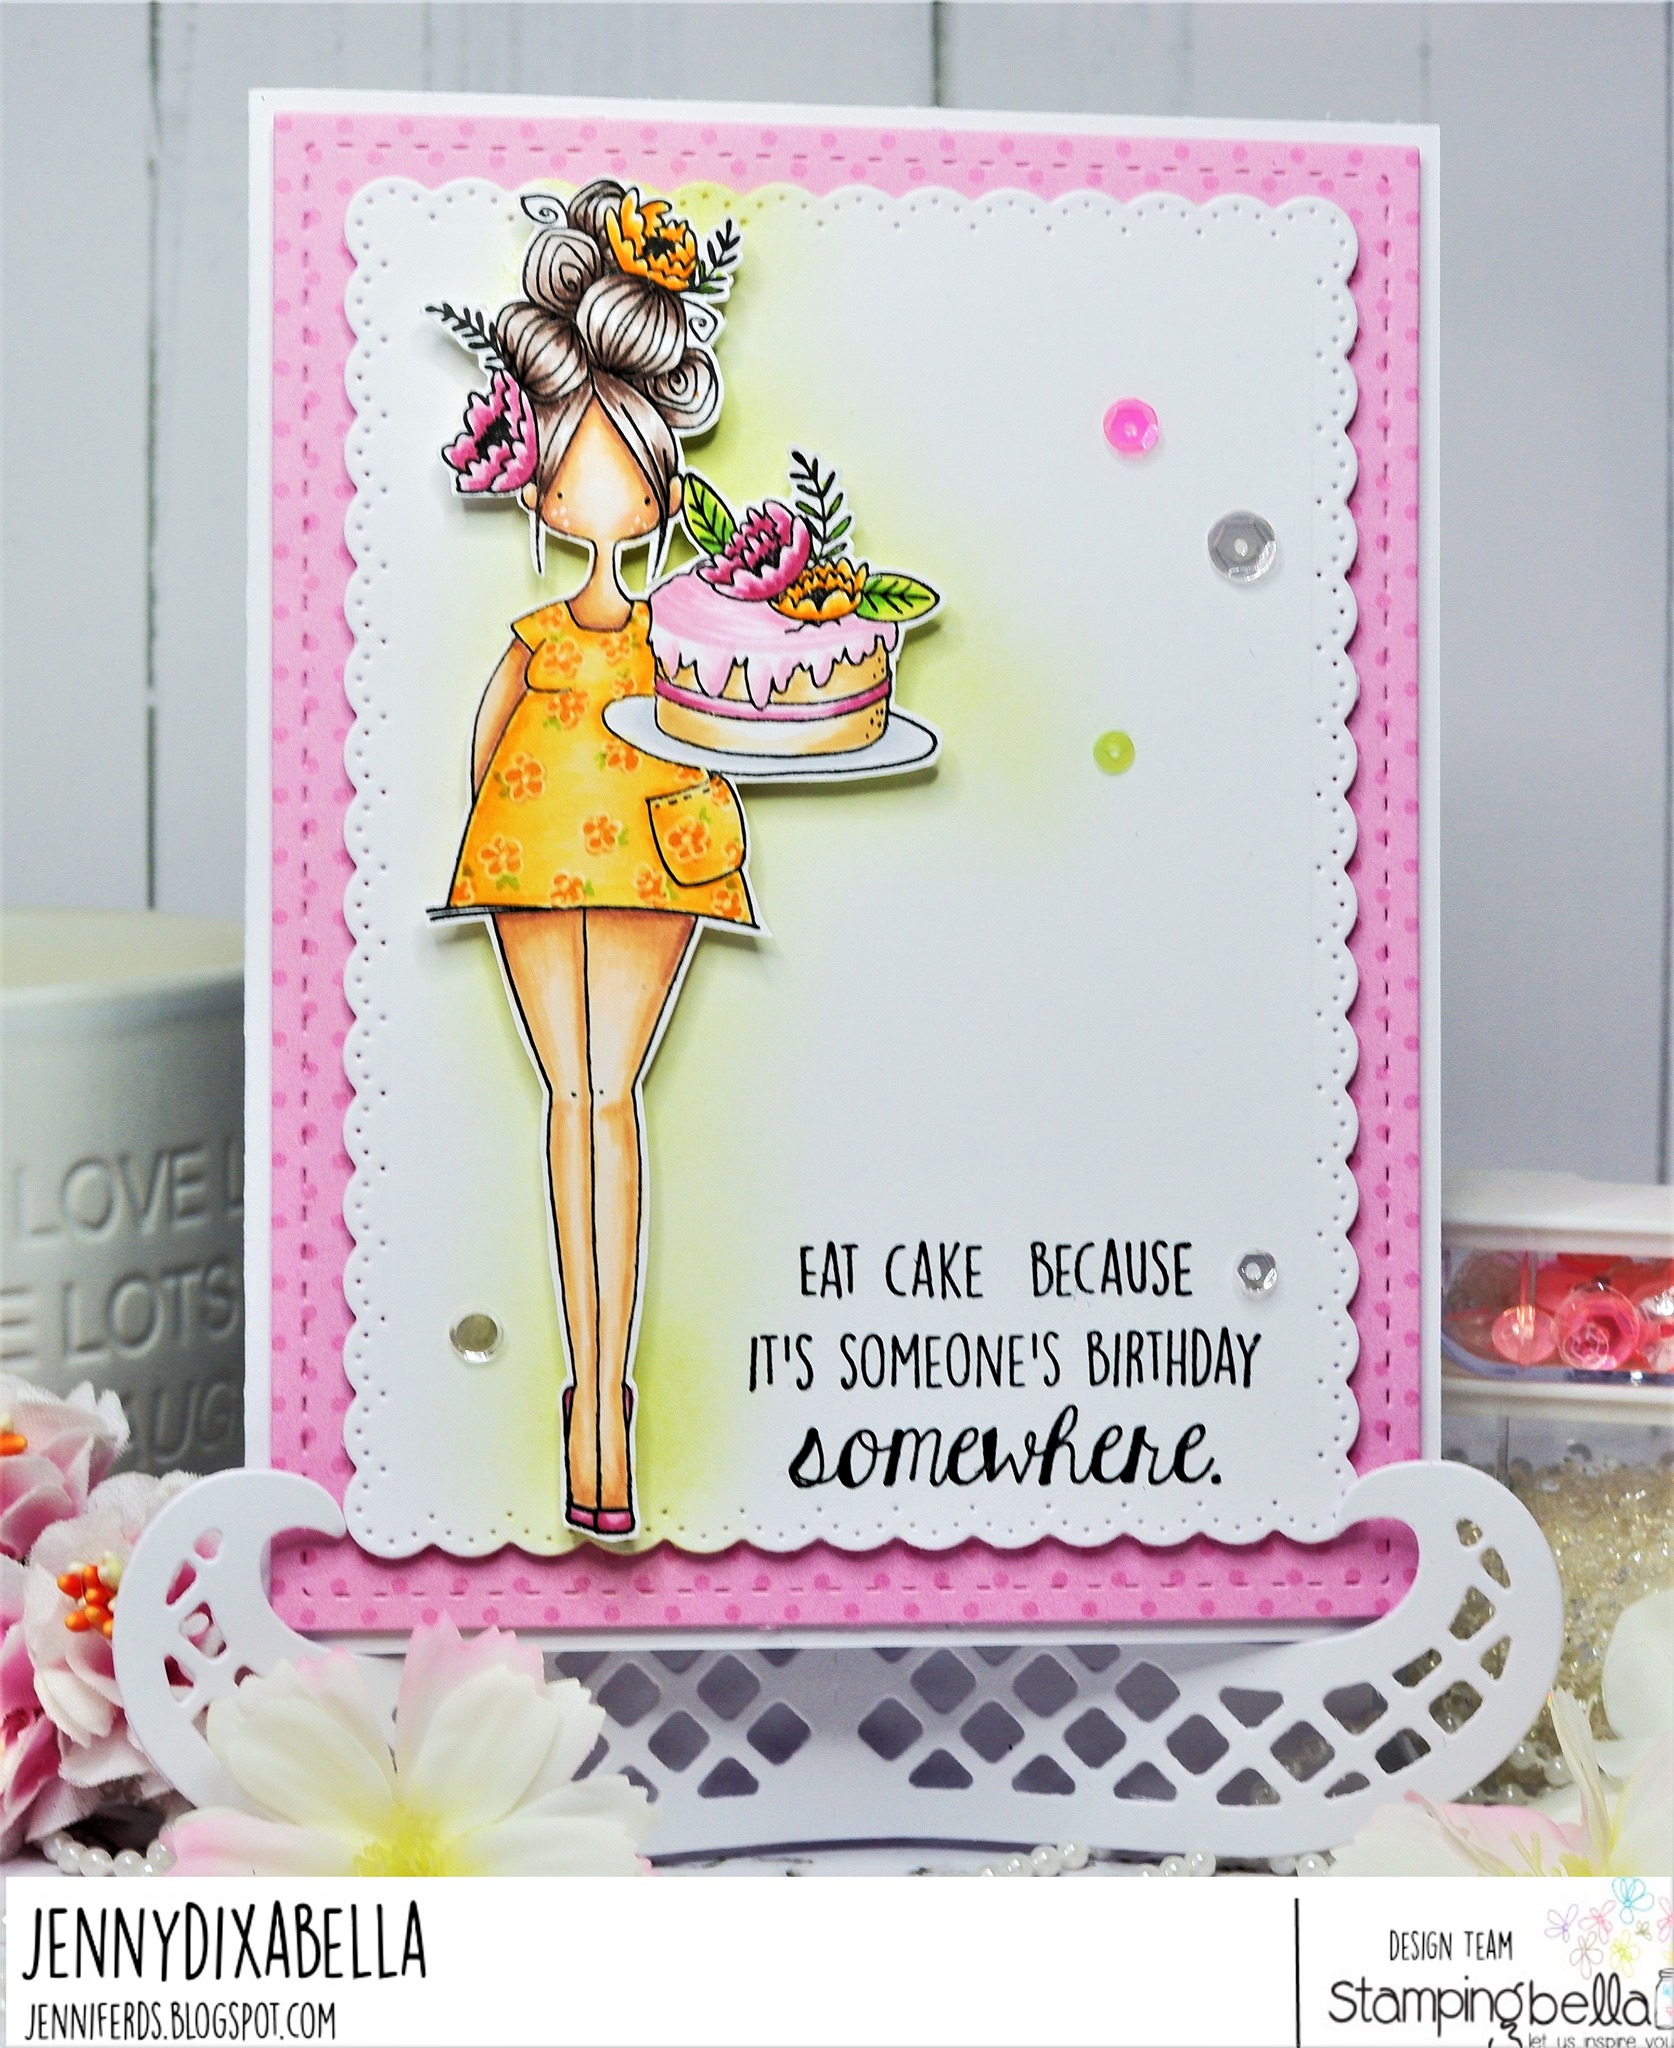 www.stampingbella.com: rubber stamp used: CURVY GIRL EATS CAKE card by Jenny Dix